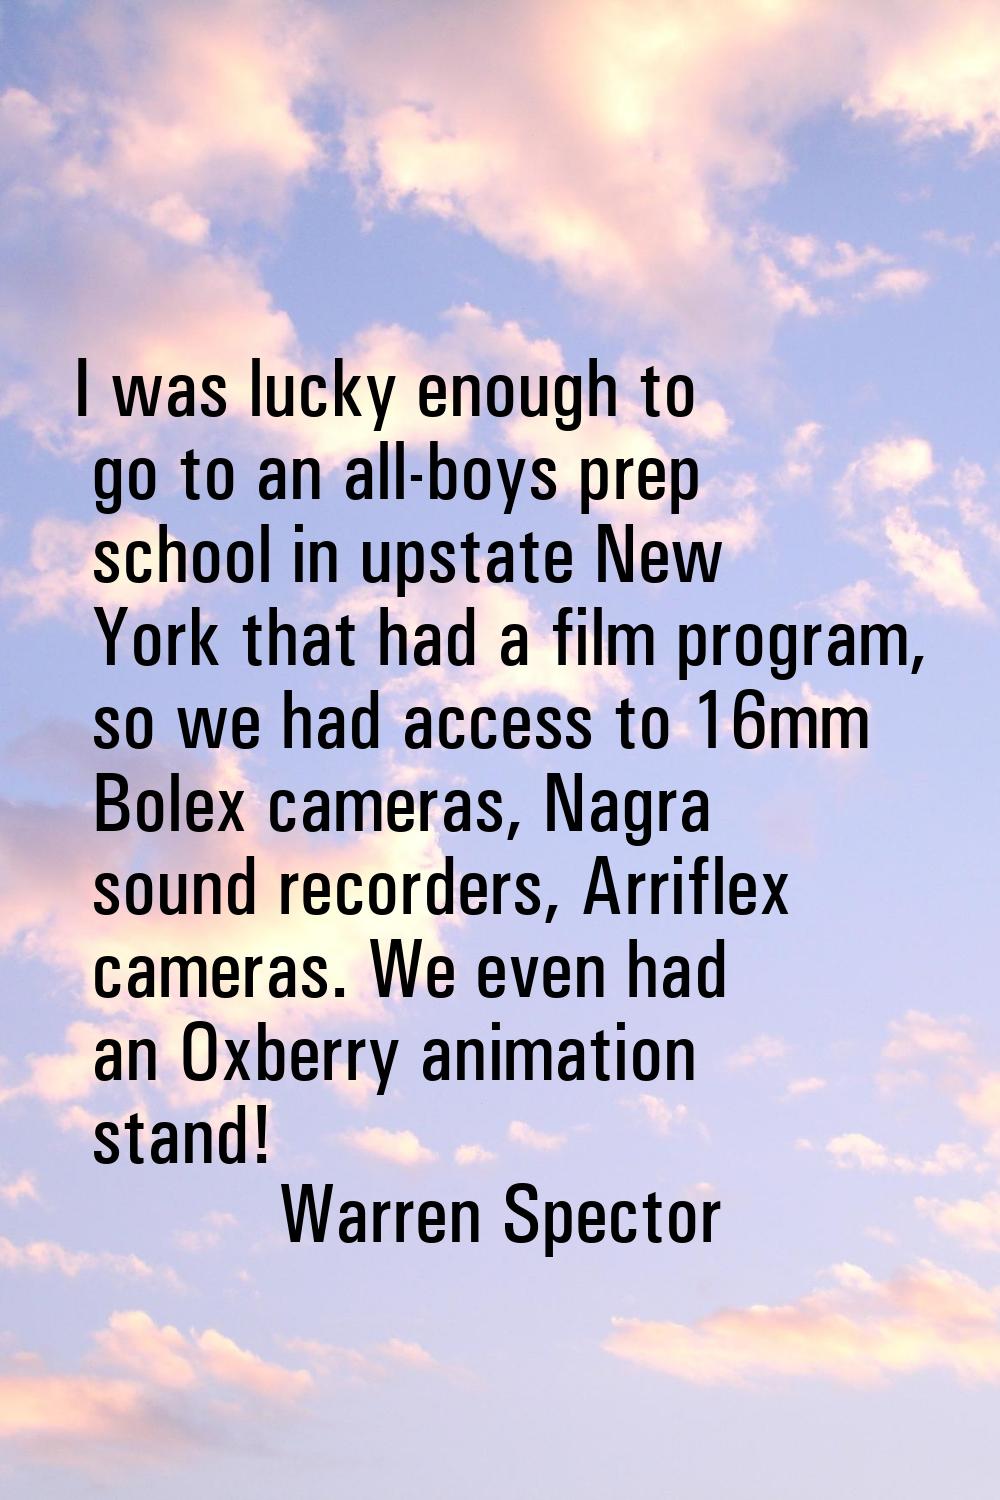 I was lucky enough to go to an all-boys prep school in upstate New York that had a film program, so